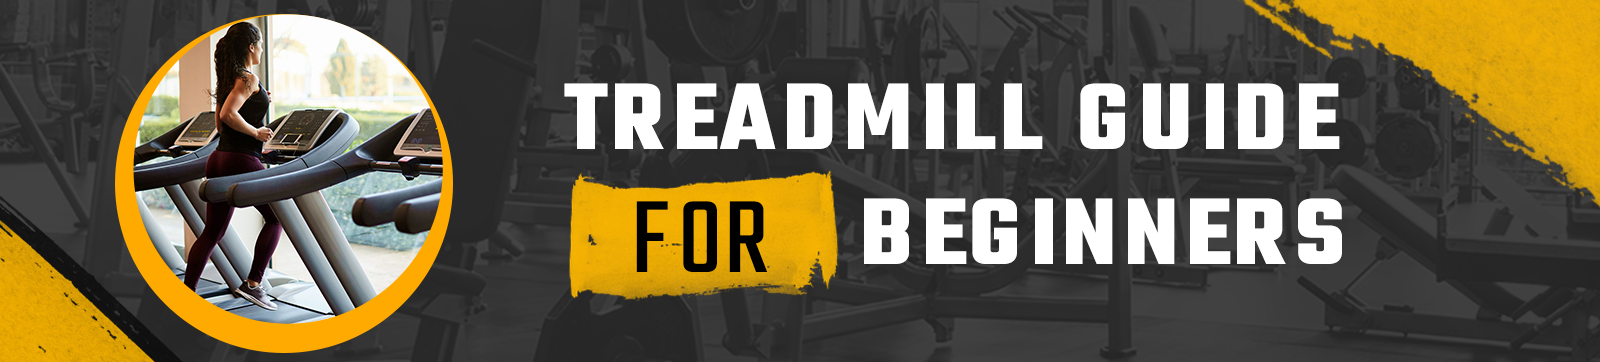 Treadmill Guide for Beginners, Safety Tips to Follow